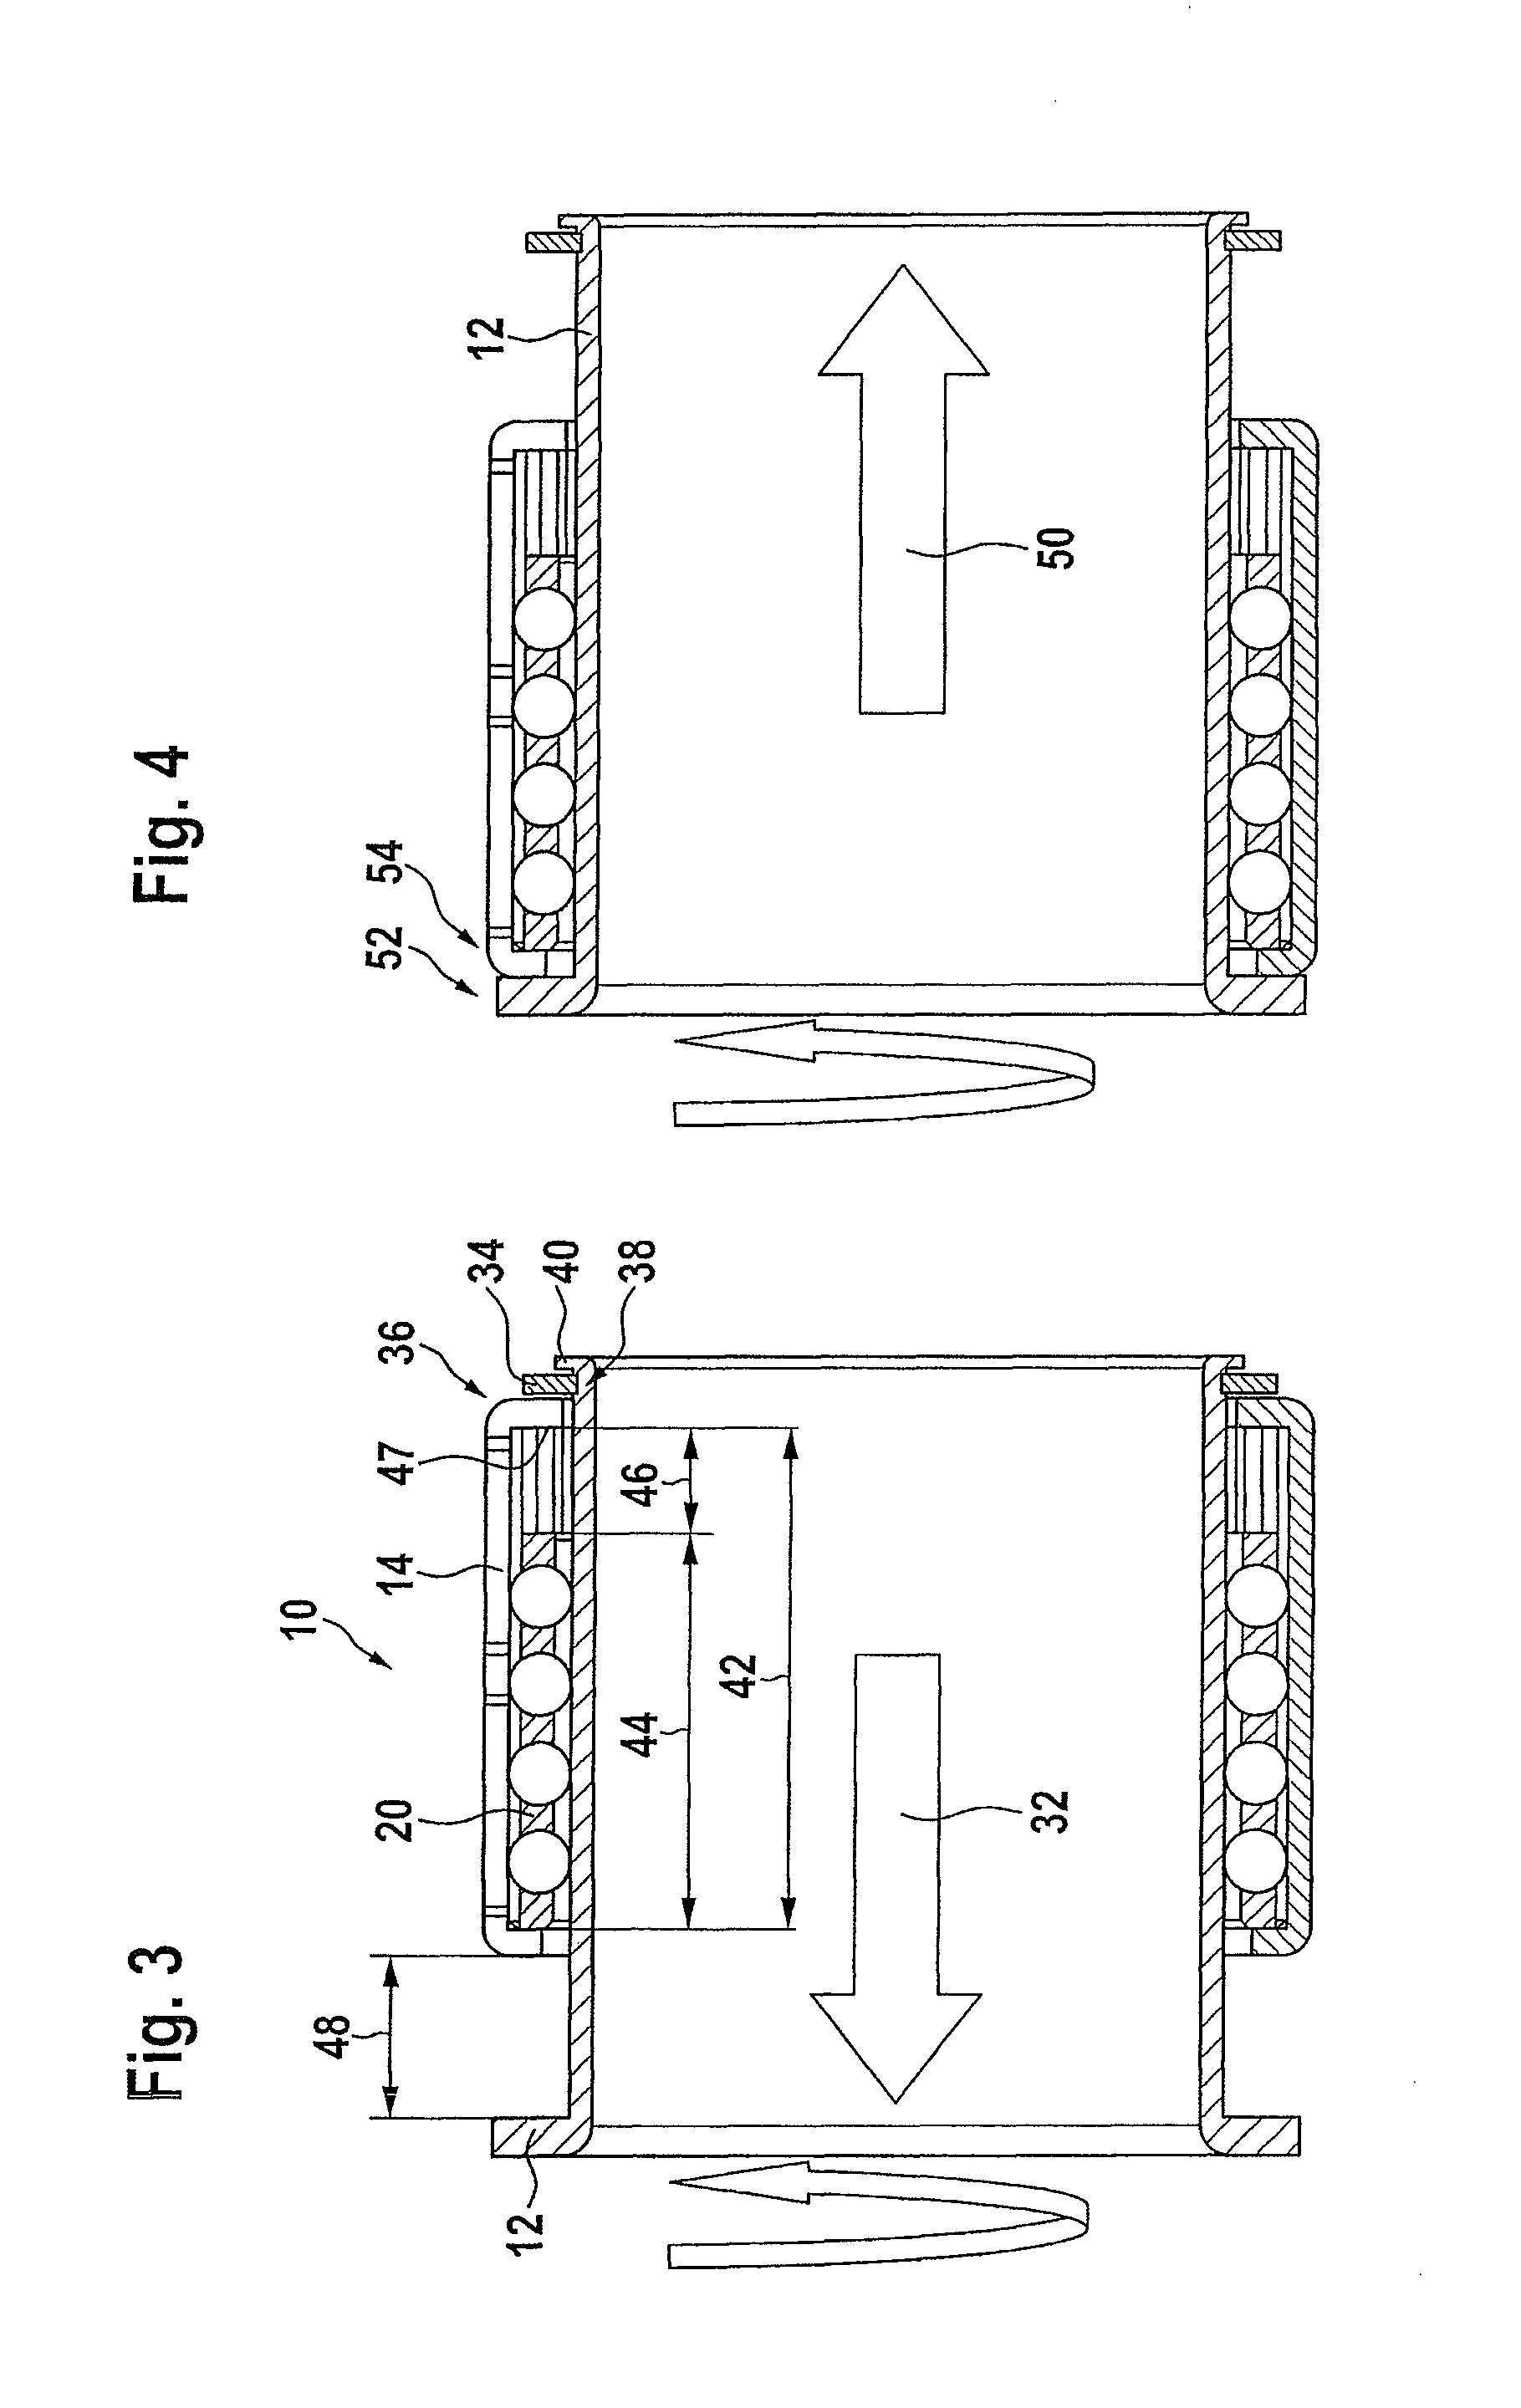 Bi-directional coupling with axial disengagement